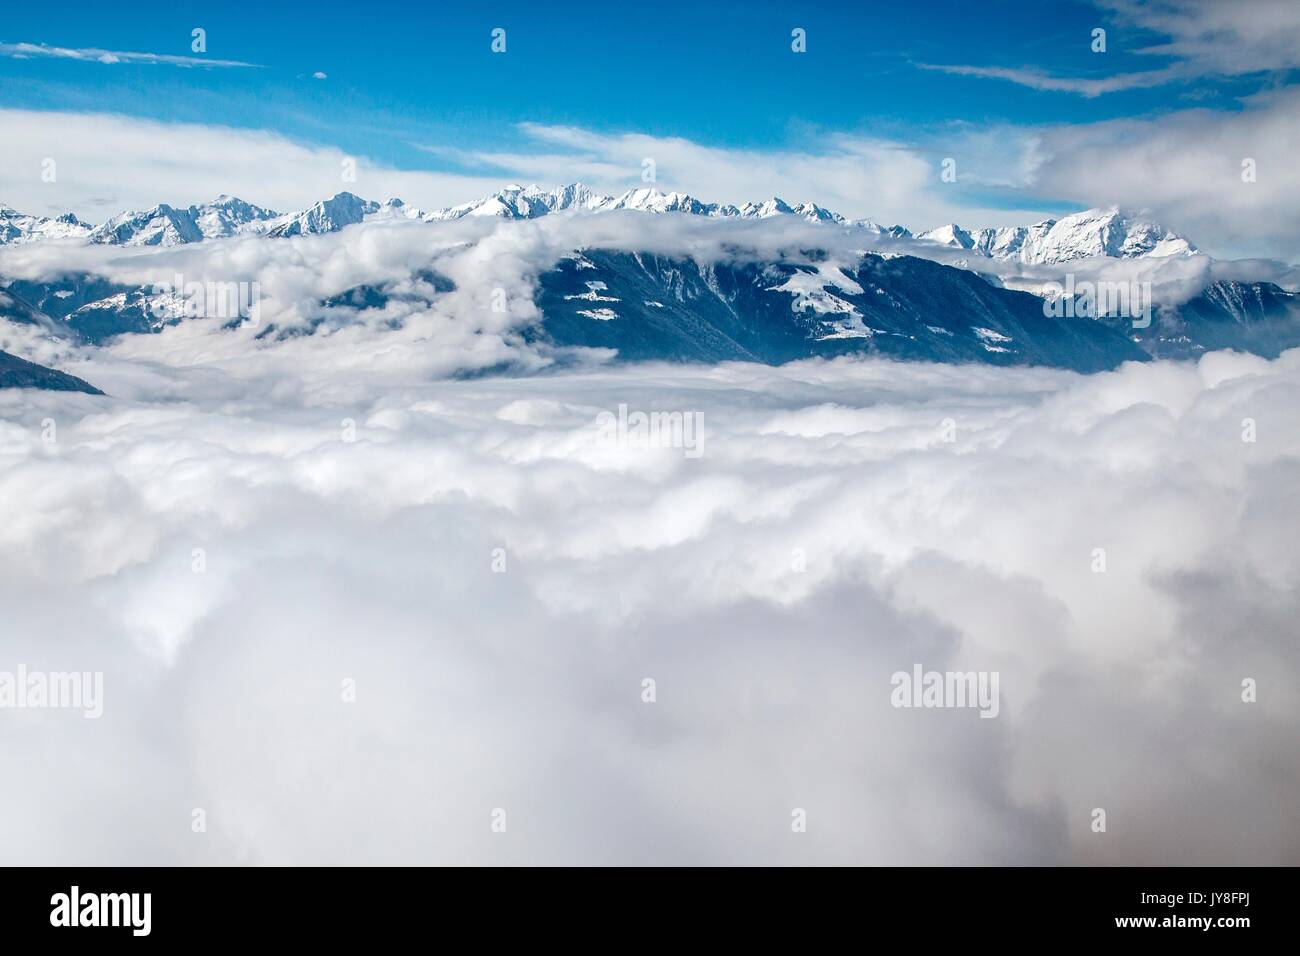 Snowy peaks of Val Gerola emerging from the fog Lower Valtellina, Lombardy Italy Europe Stock Photo